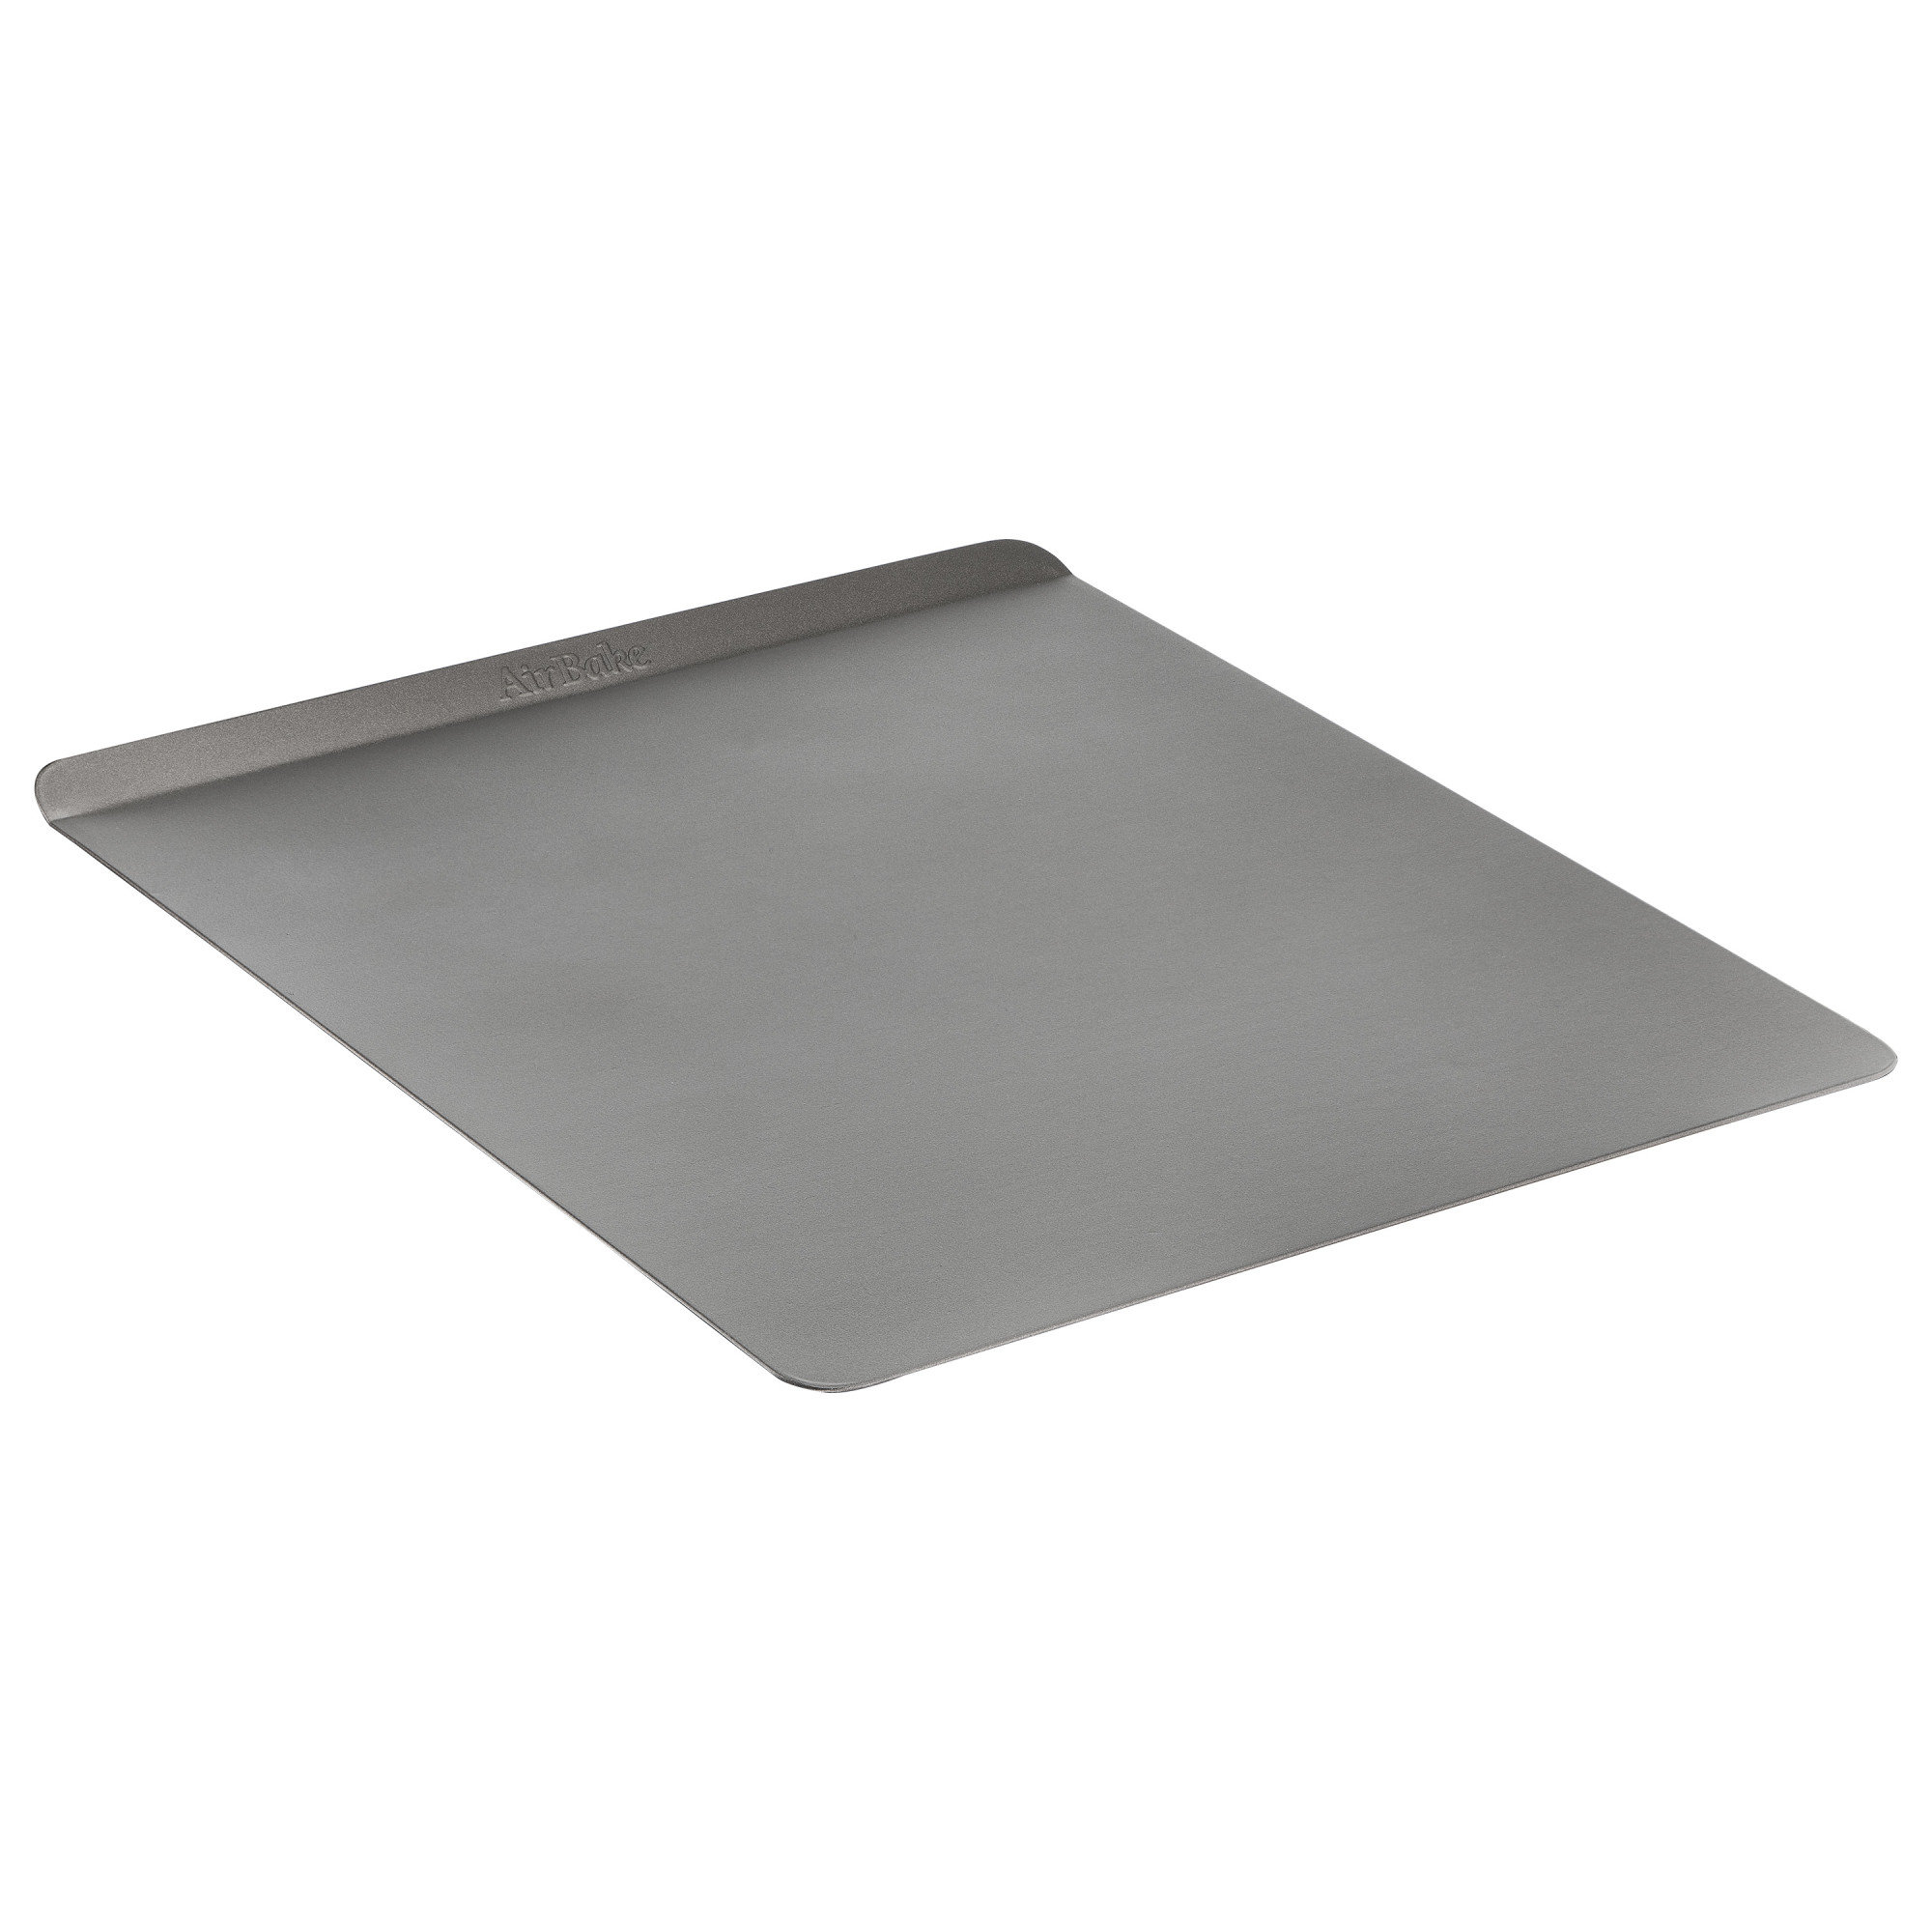 AirBake Natural Cookie Sheet 14 x 12 in 